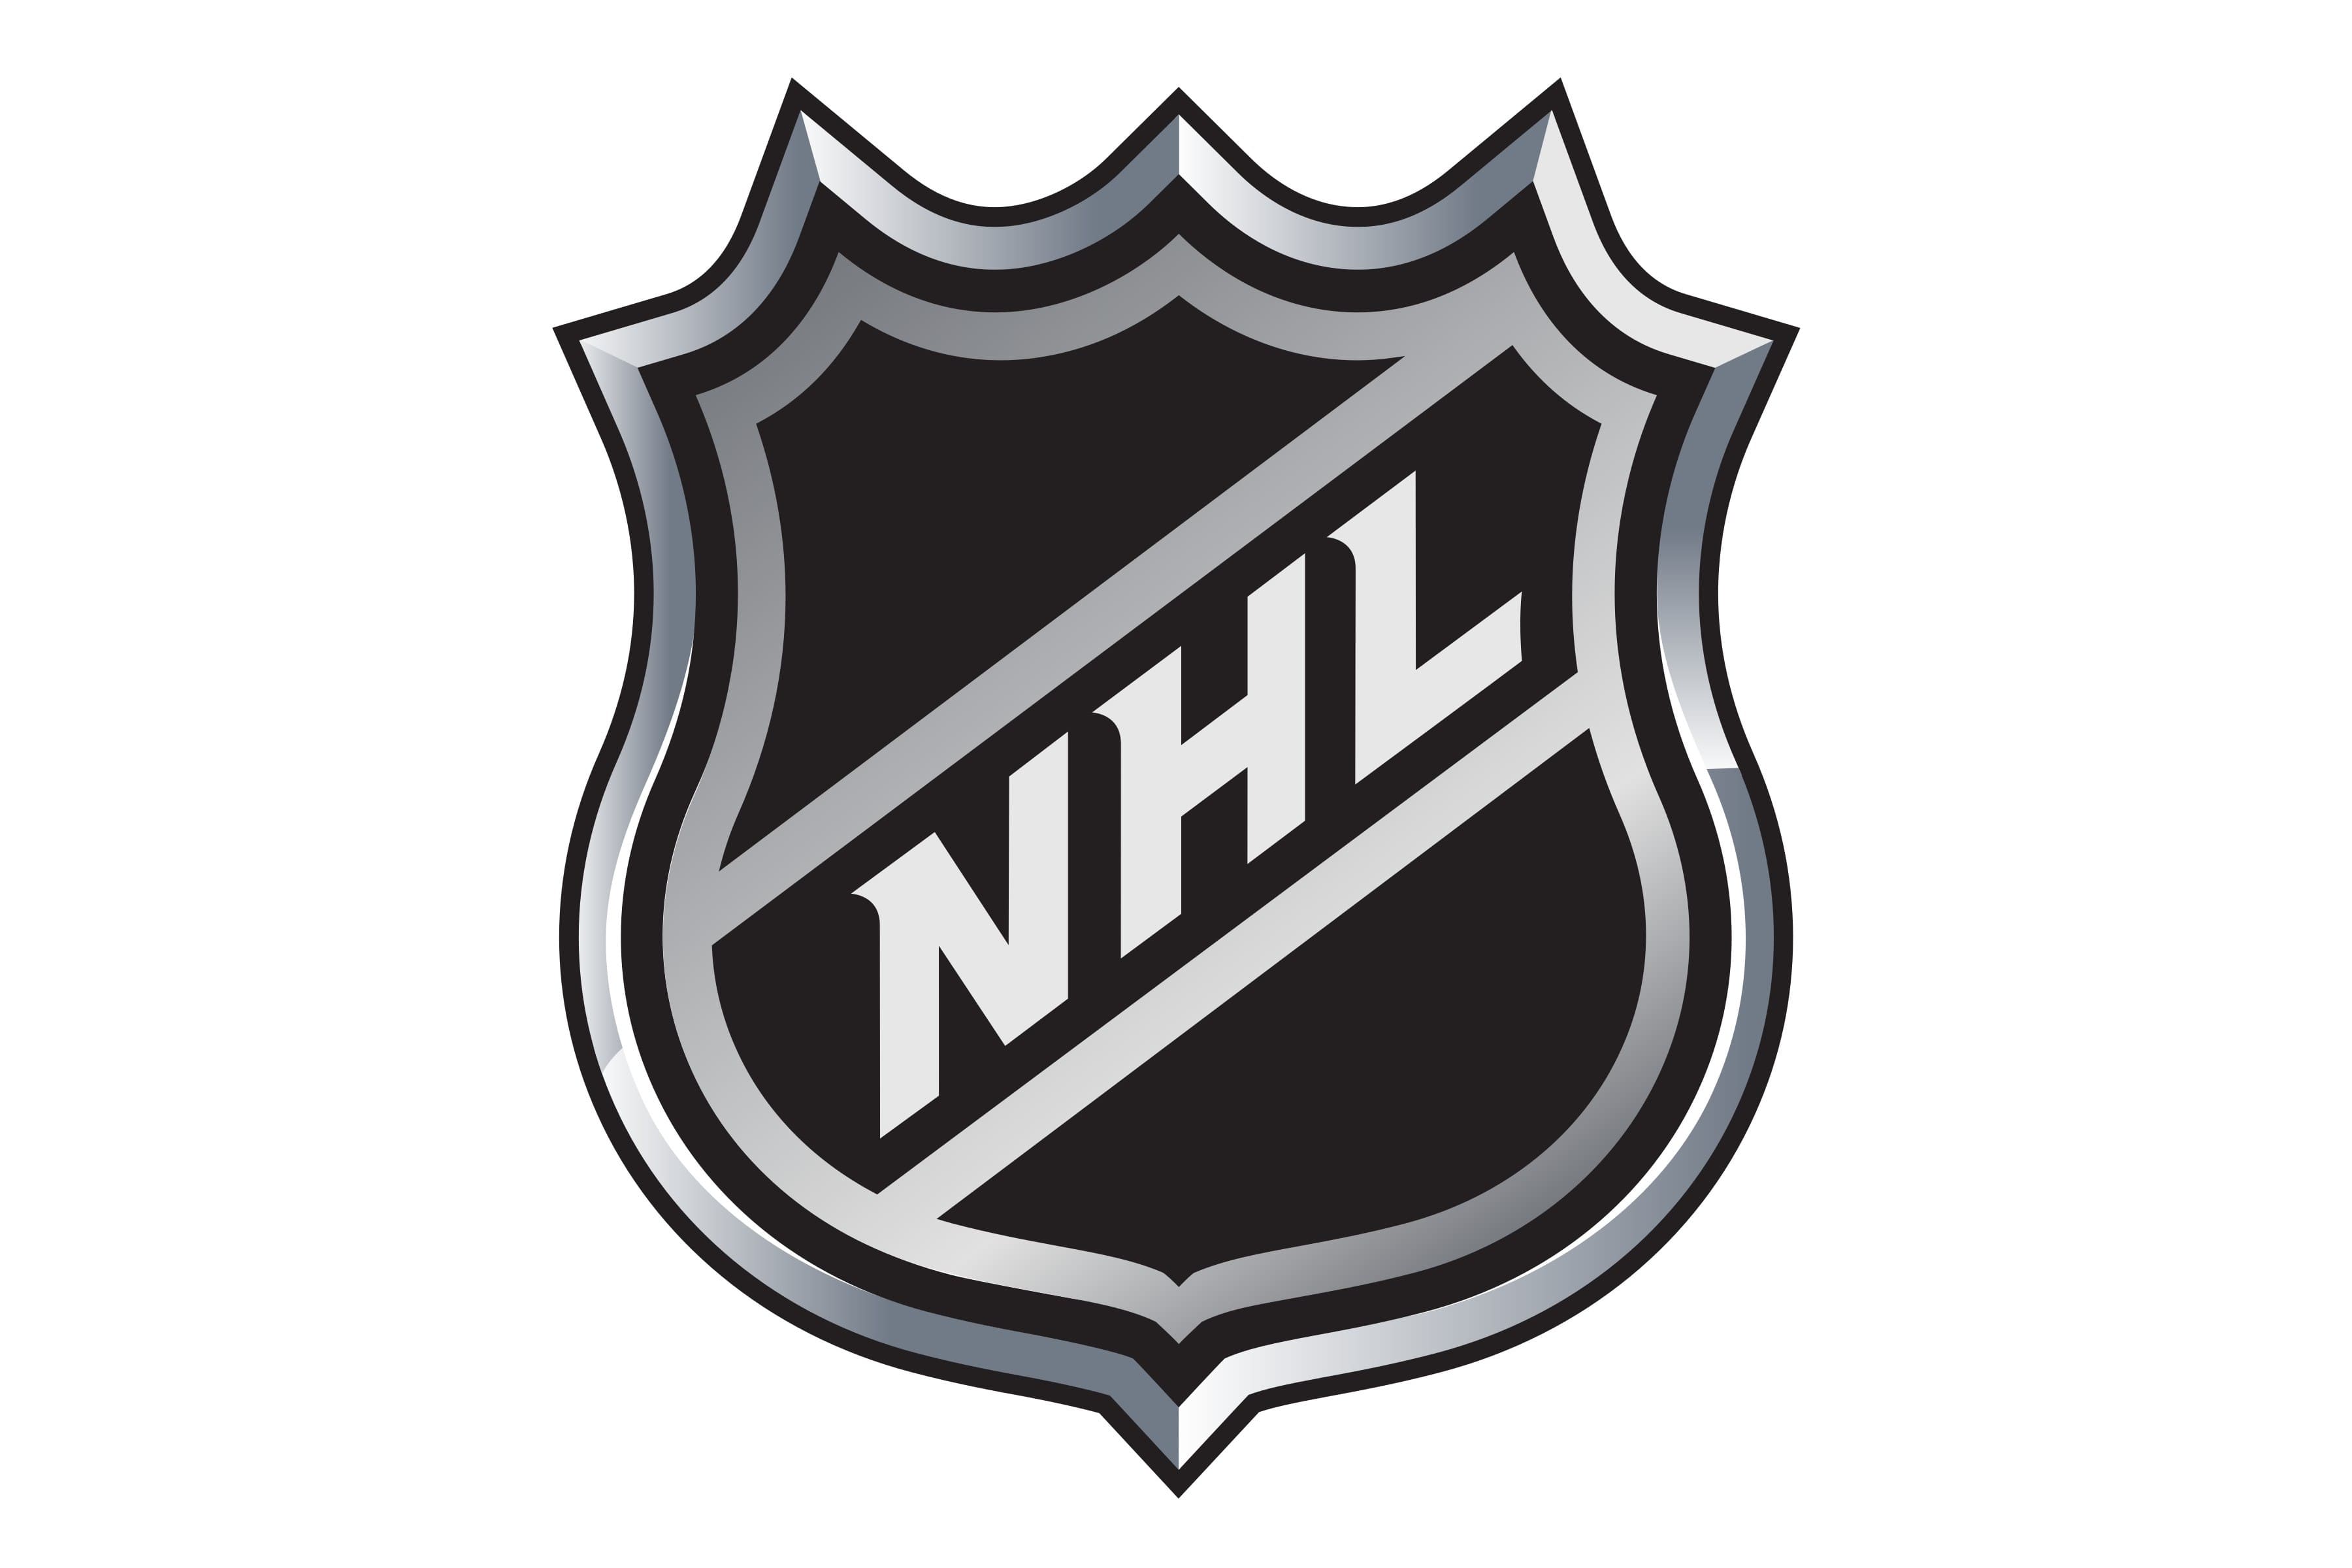 NHL Logo (National Hockey League) and symbol, meaning, history, PNG, brand